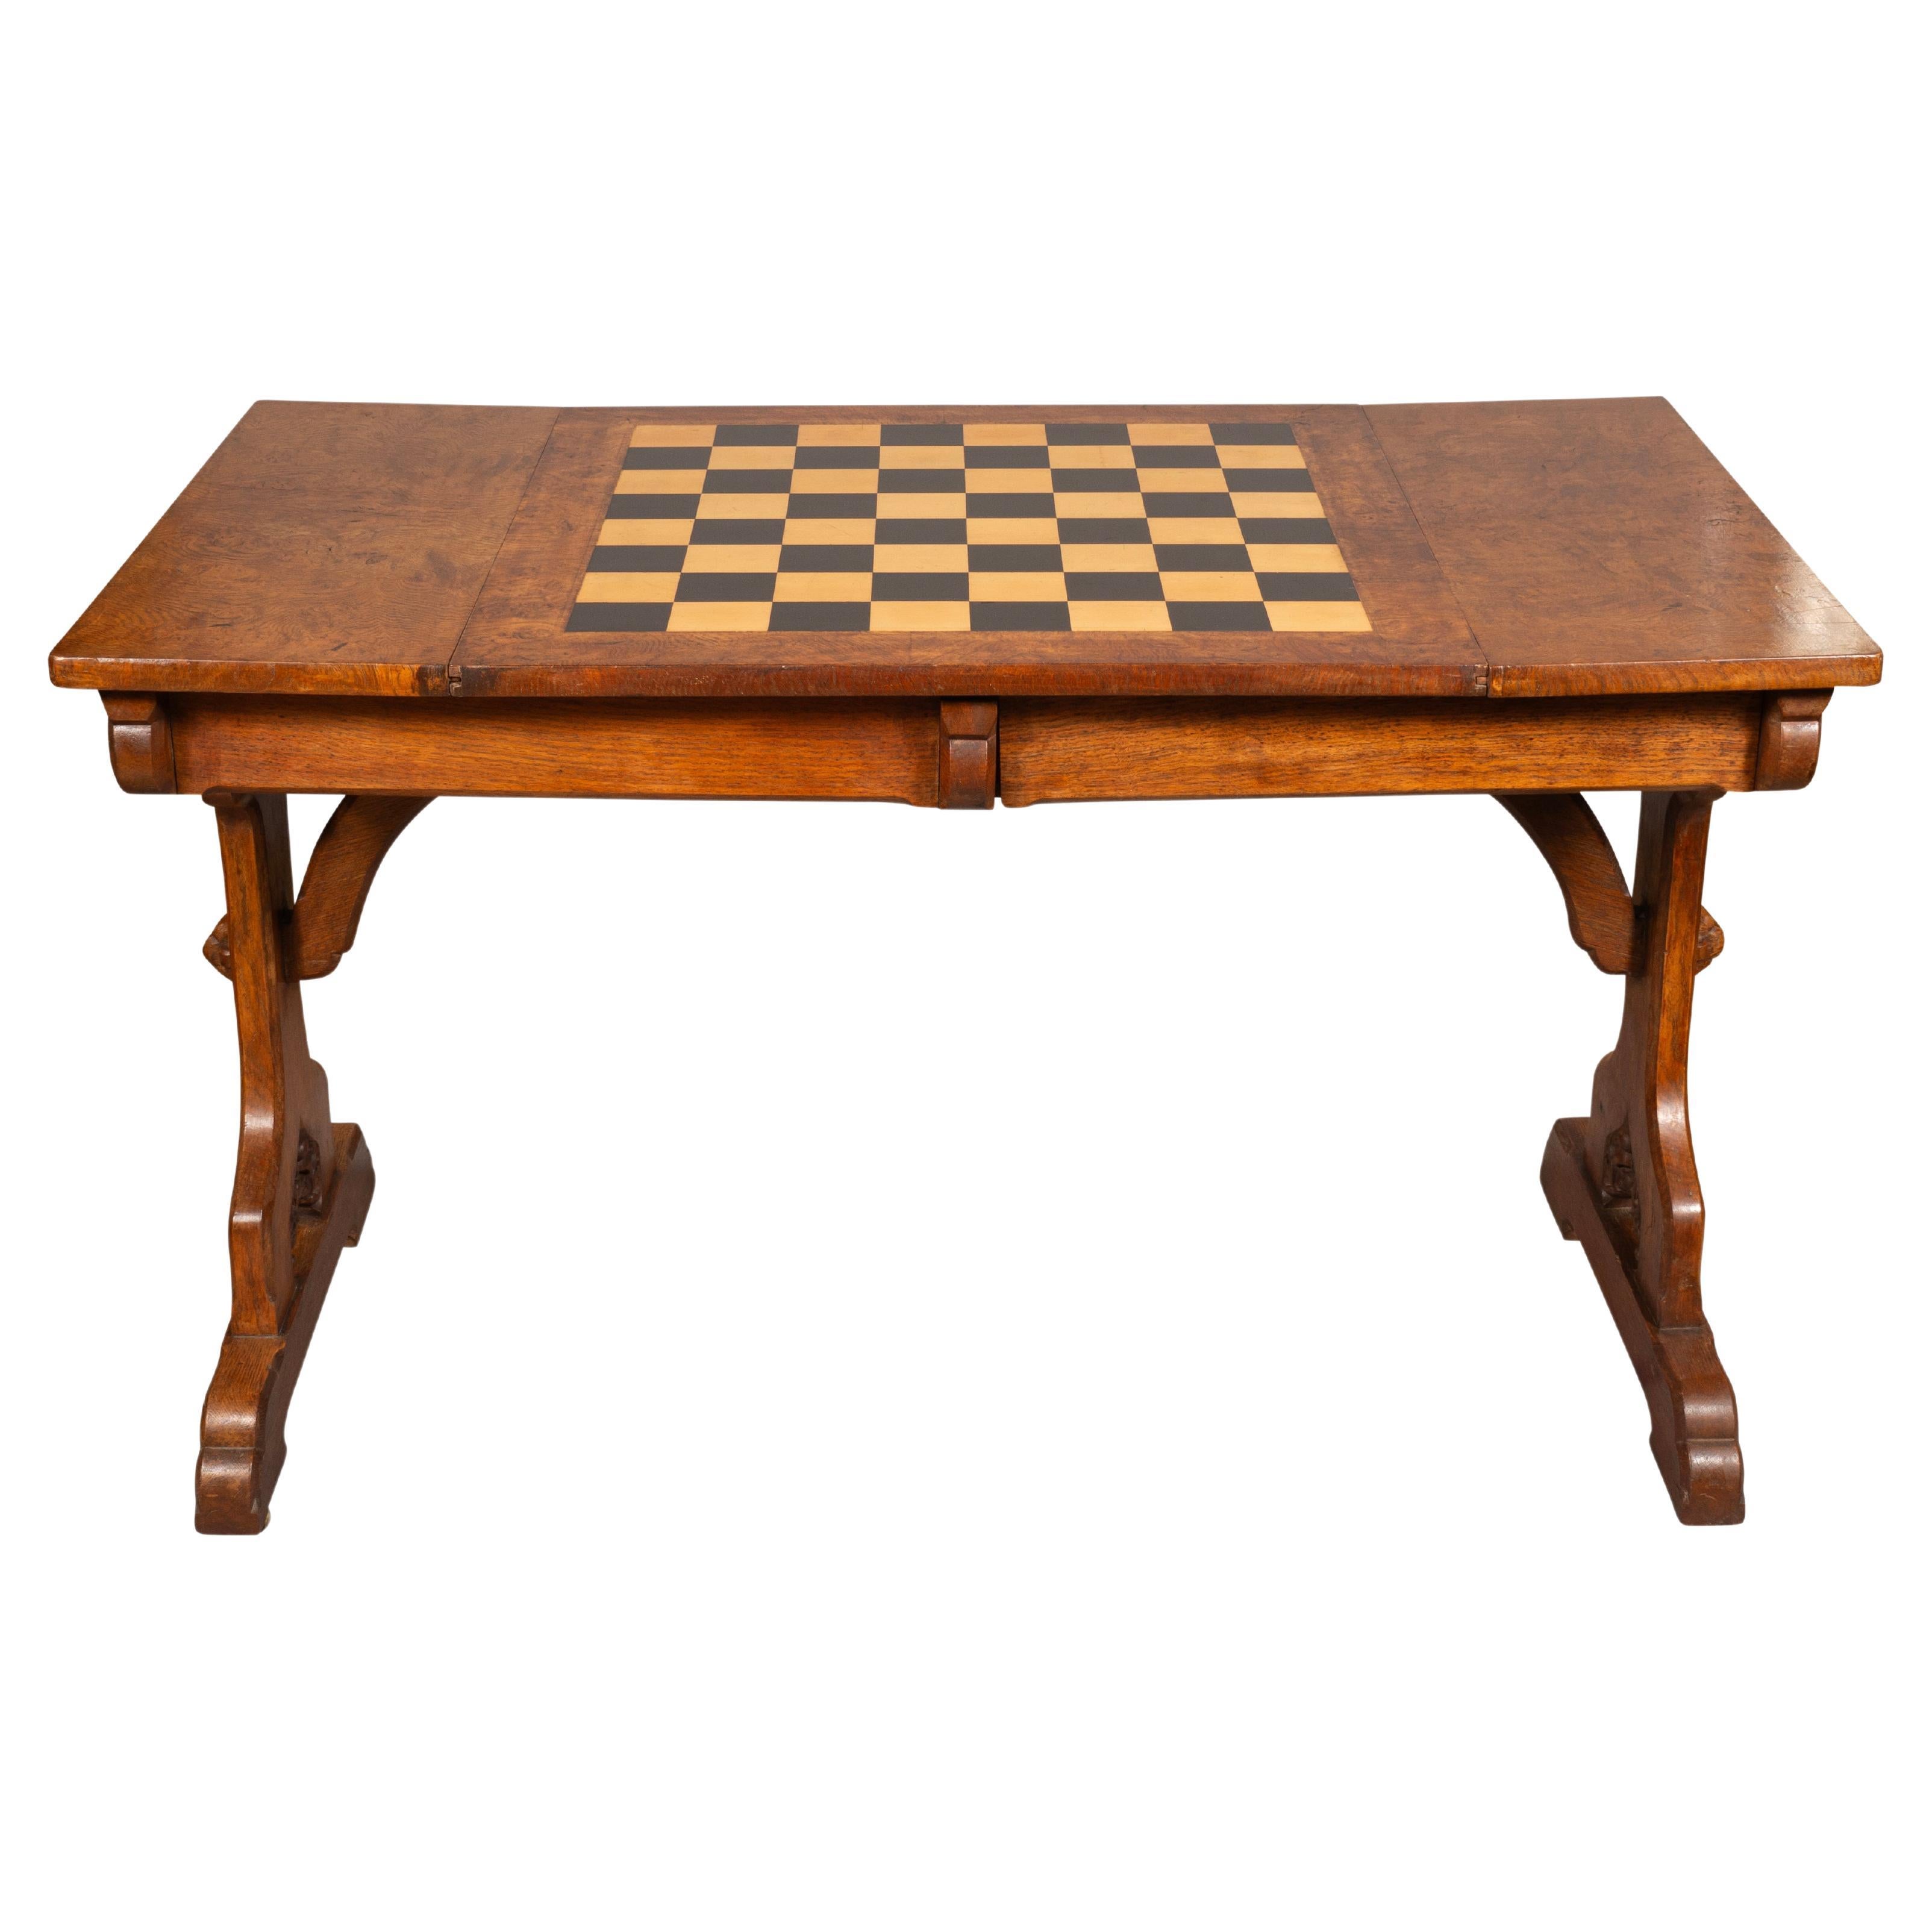 Victorian Gothic Revival Pollard Oak Games Table Attributed To Pugin For Sale